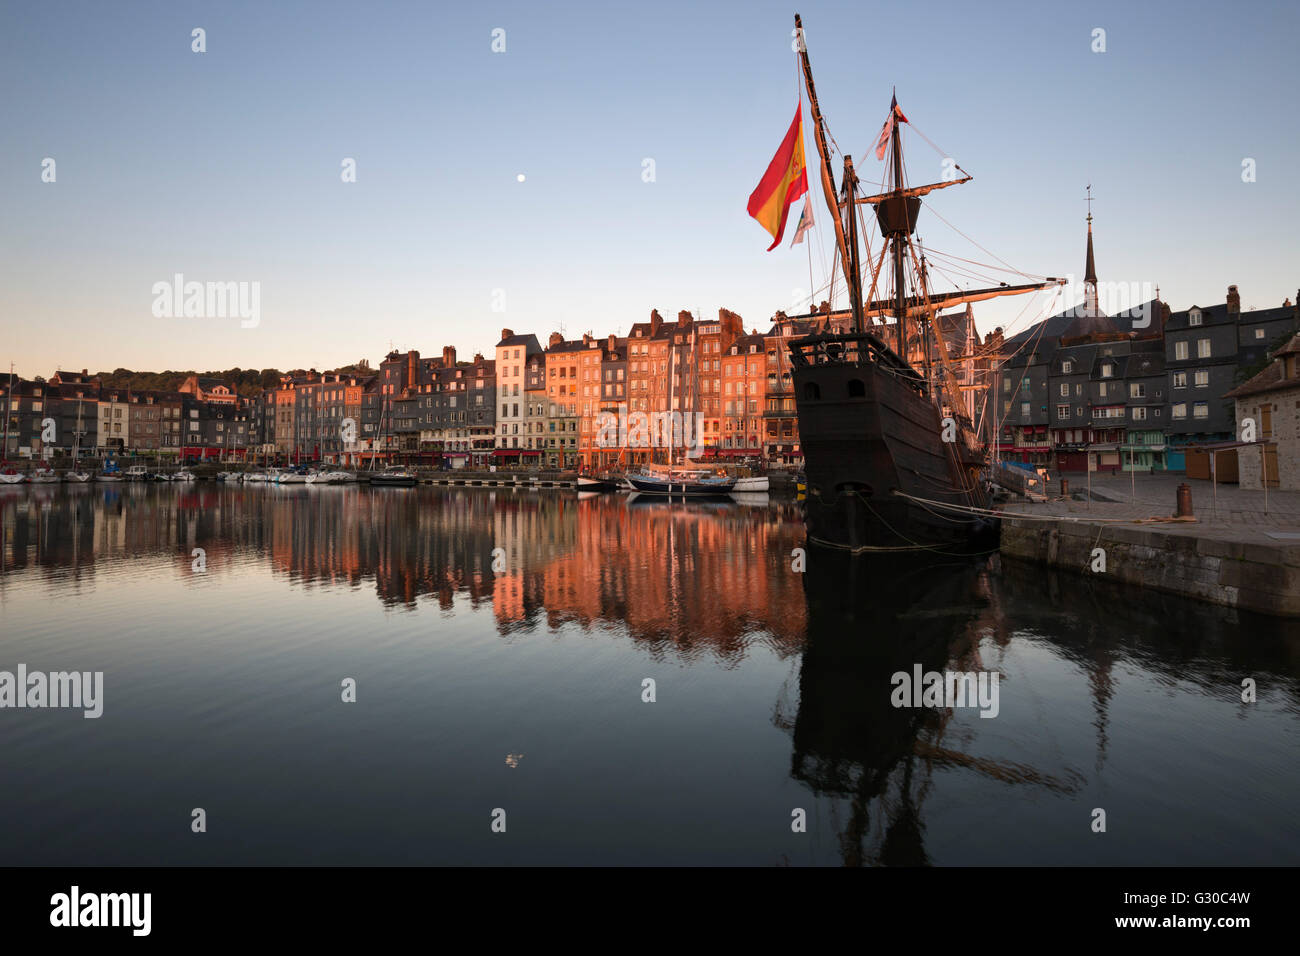 Vieux Bassin looking to Saint Catherine Quay with replica galleon at dawn, Honfleur, Normandy, France, Europe Stock Photo